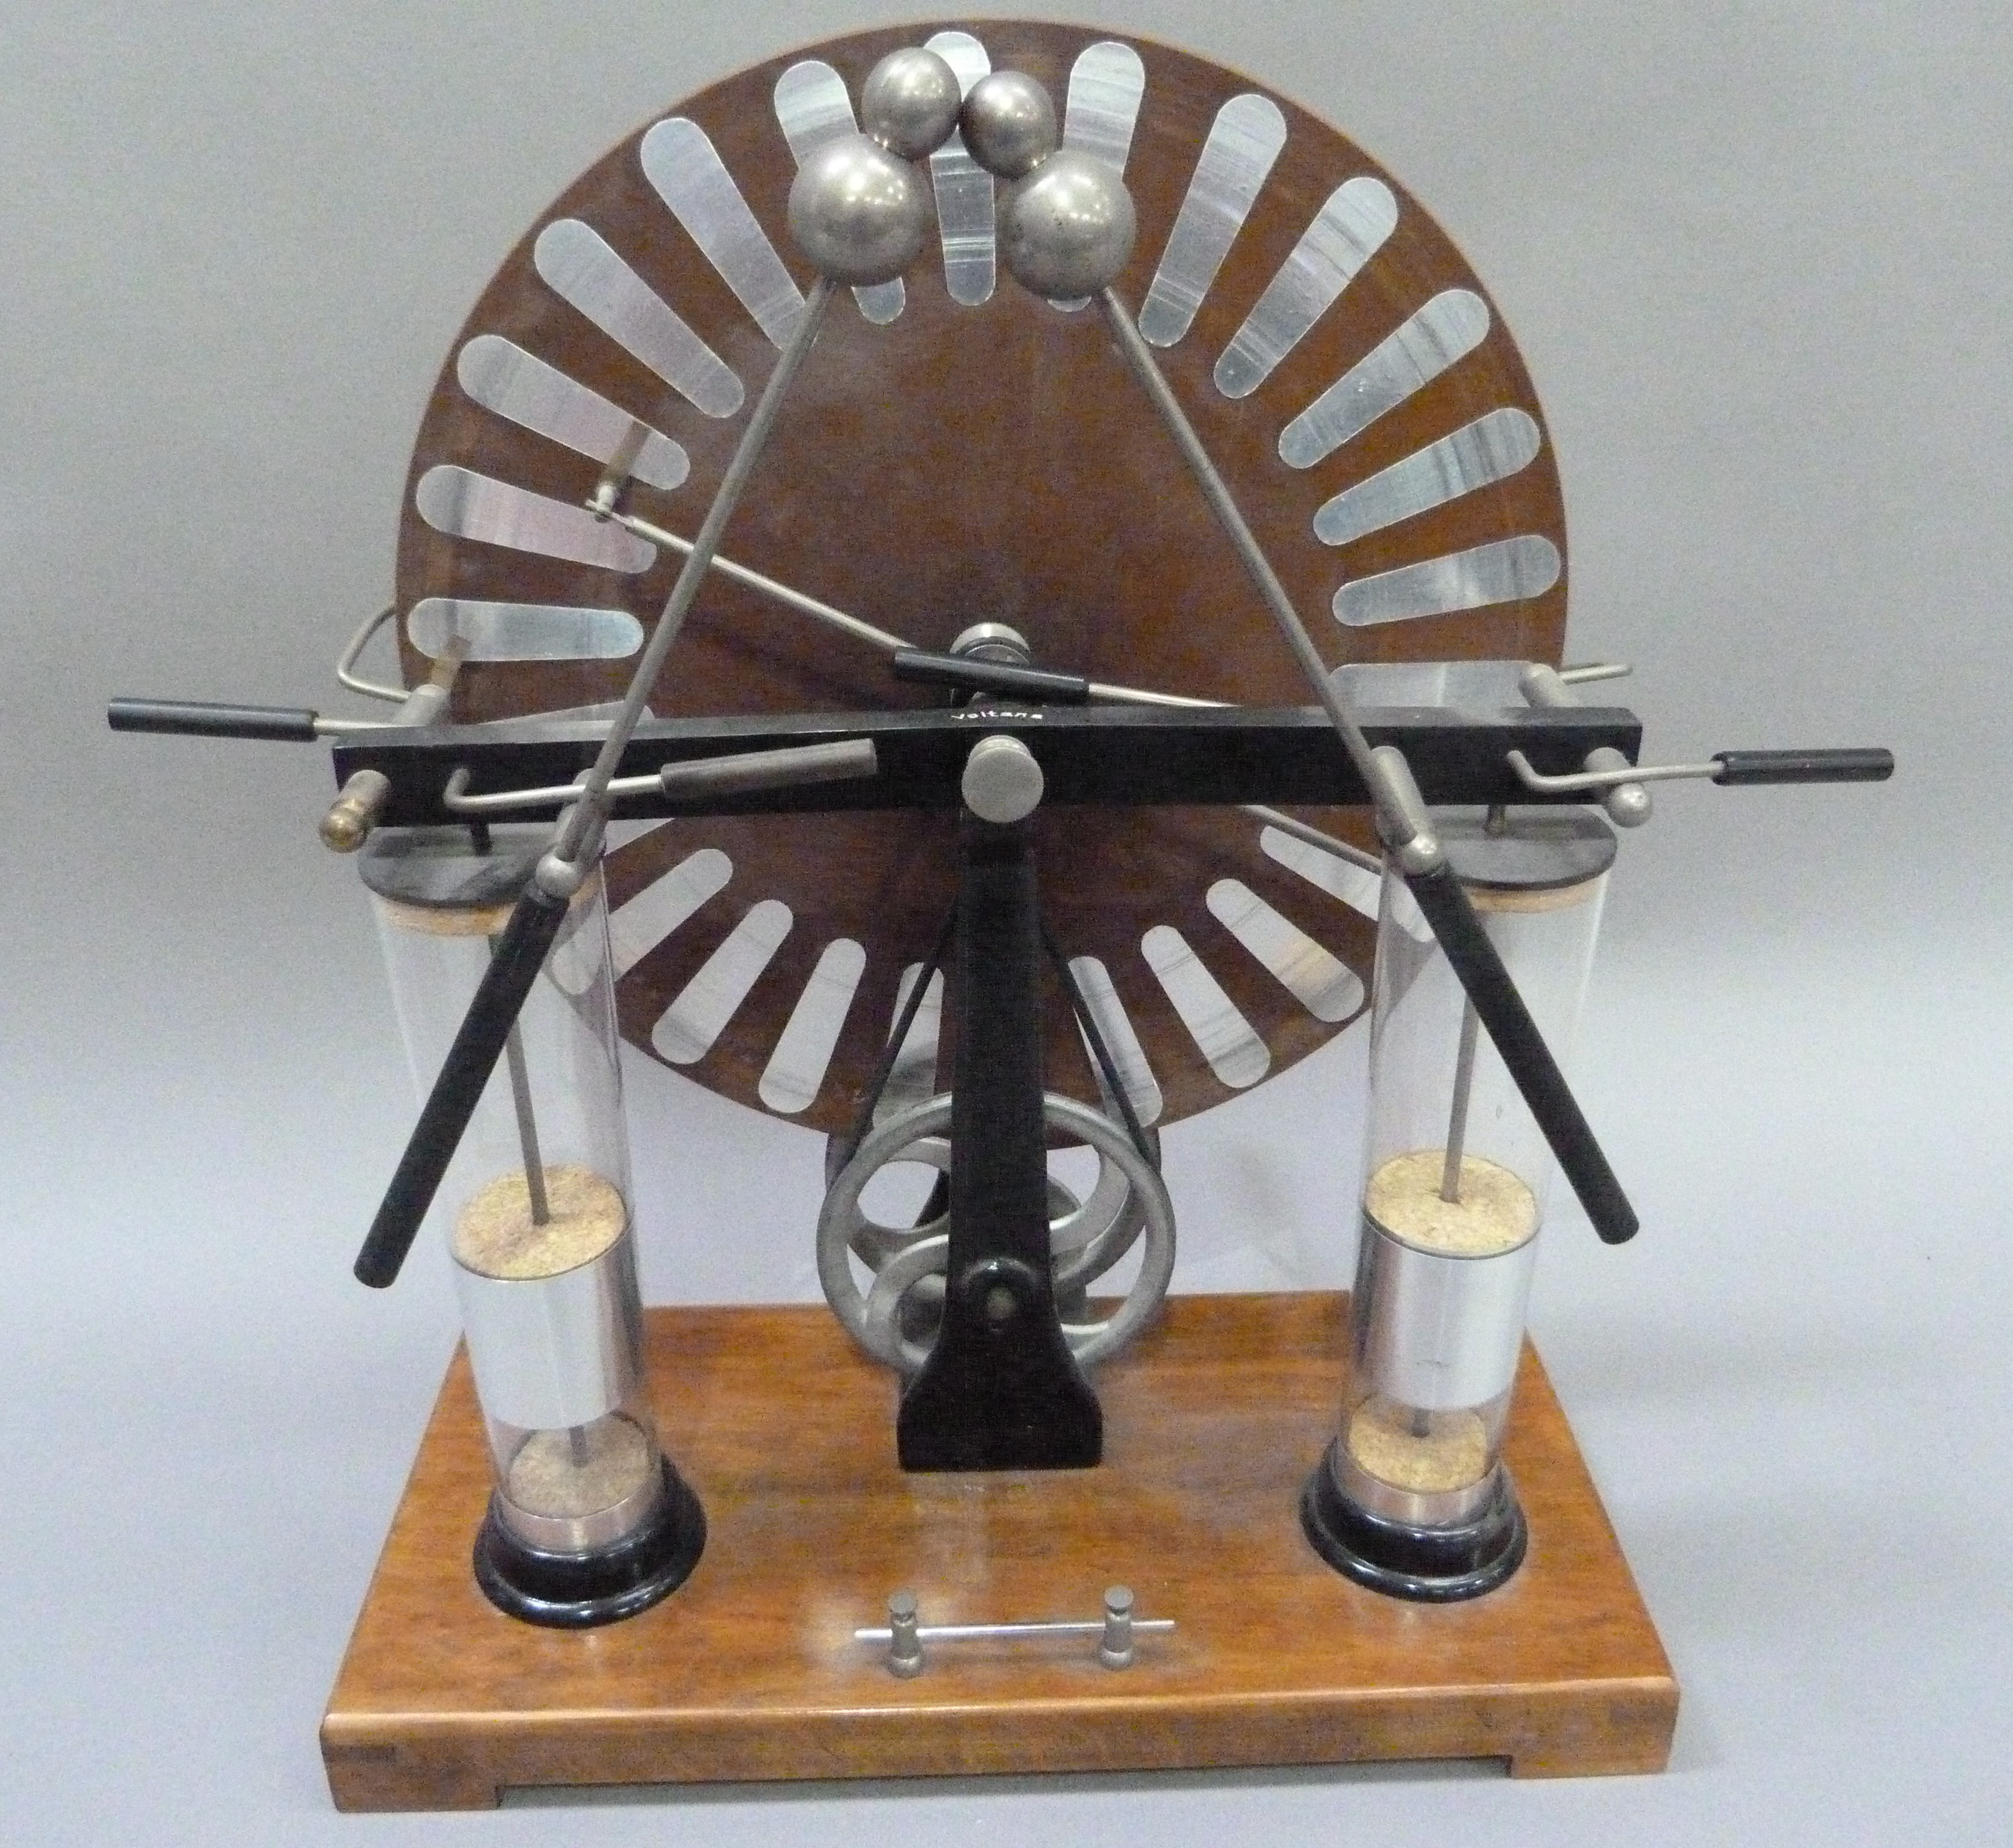 A Wimshurst Influence machine complete with two Lehden jars (static electricity generator) - Image 3 of 4